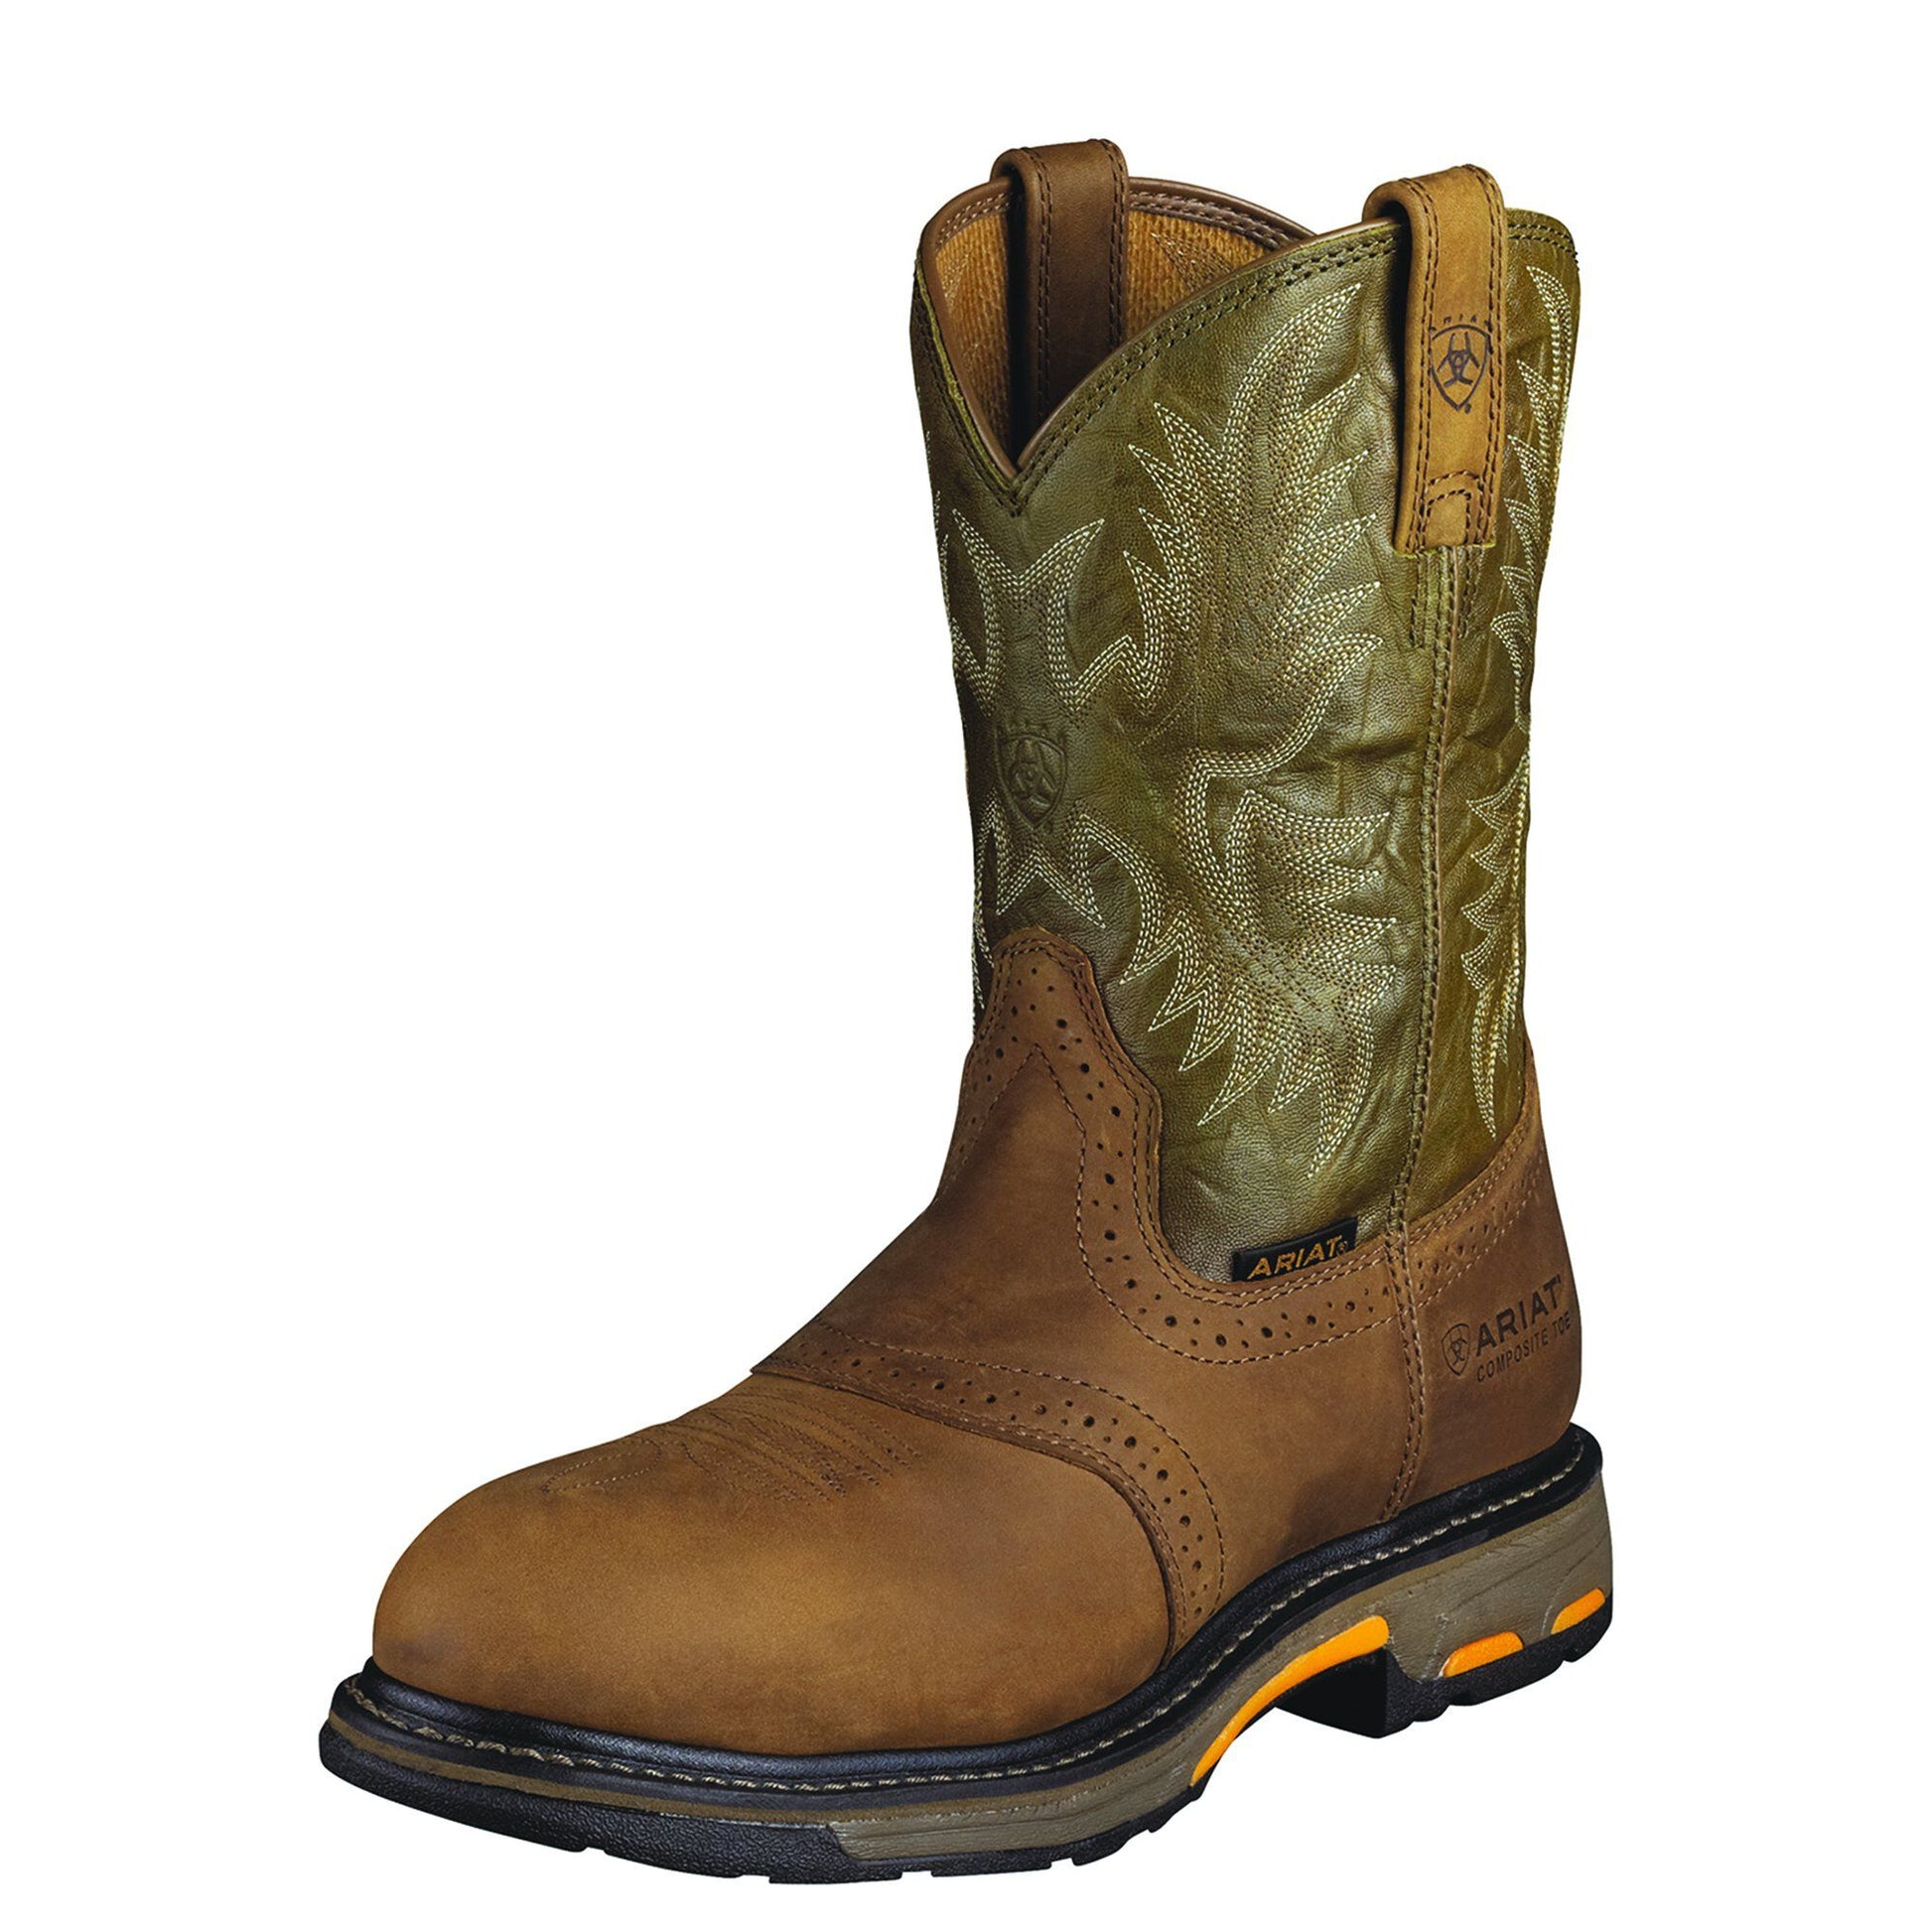 Ariat Men's WorkHog Pull-on Composite Toe Boot - Aged Bark/Army Green - French's Boots